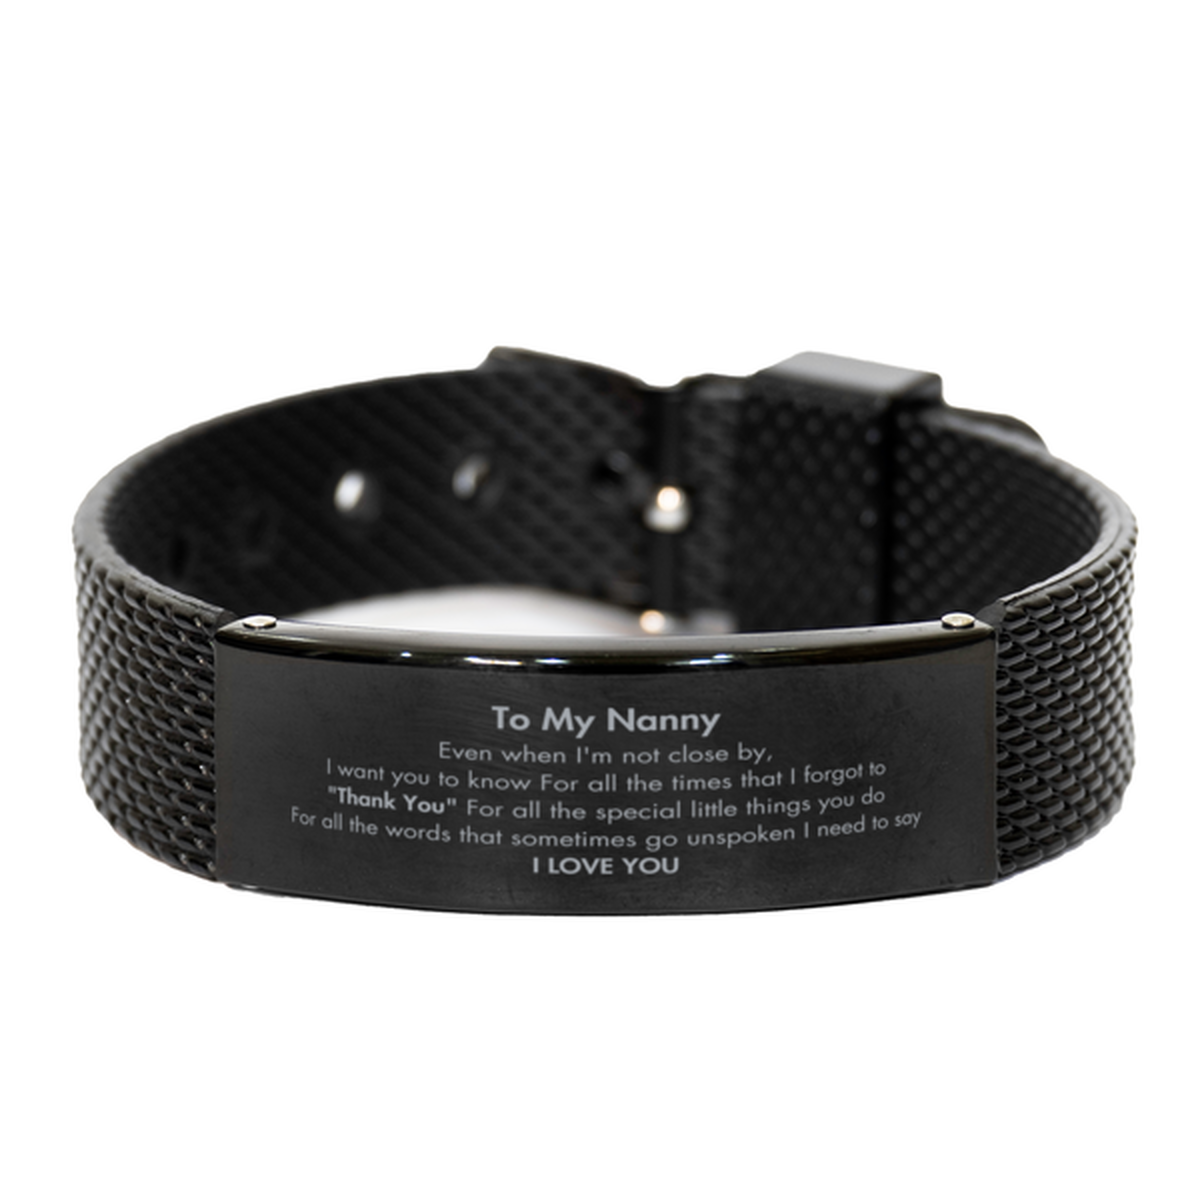 Thank You Gifts for Nanny, Keepsake Black Shark Mesh Bracelet Gifts for Nanny Birthday Mother's day Father's Day Nanny For all the words That sometimes go unspoken I need to say I LOVE YOU